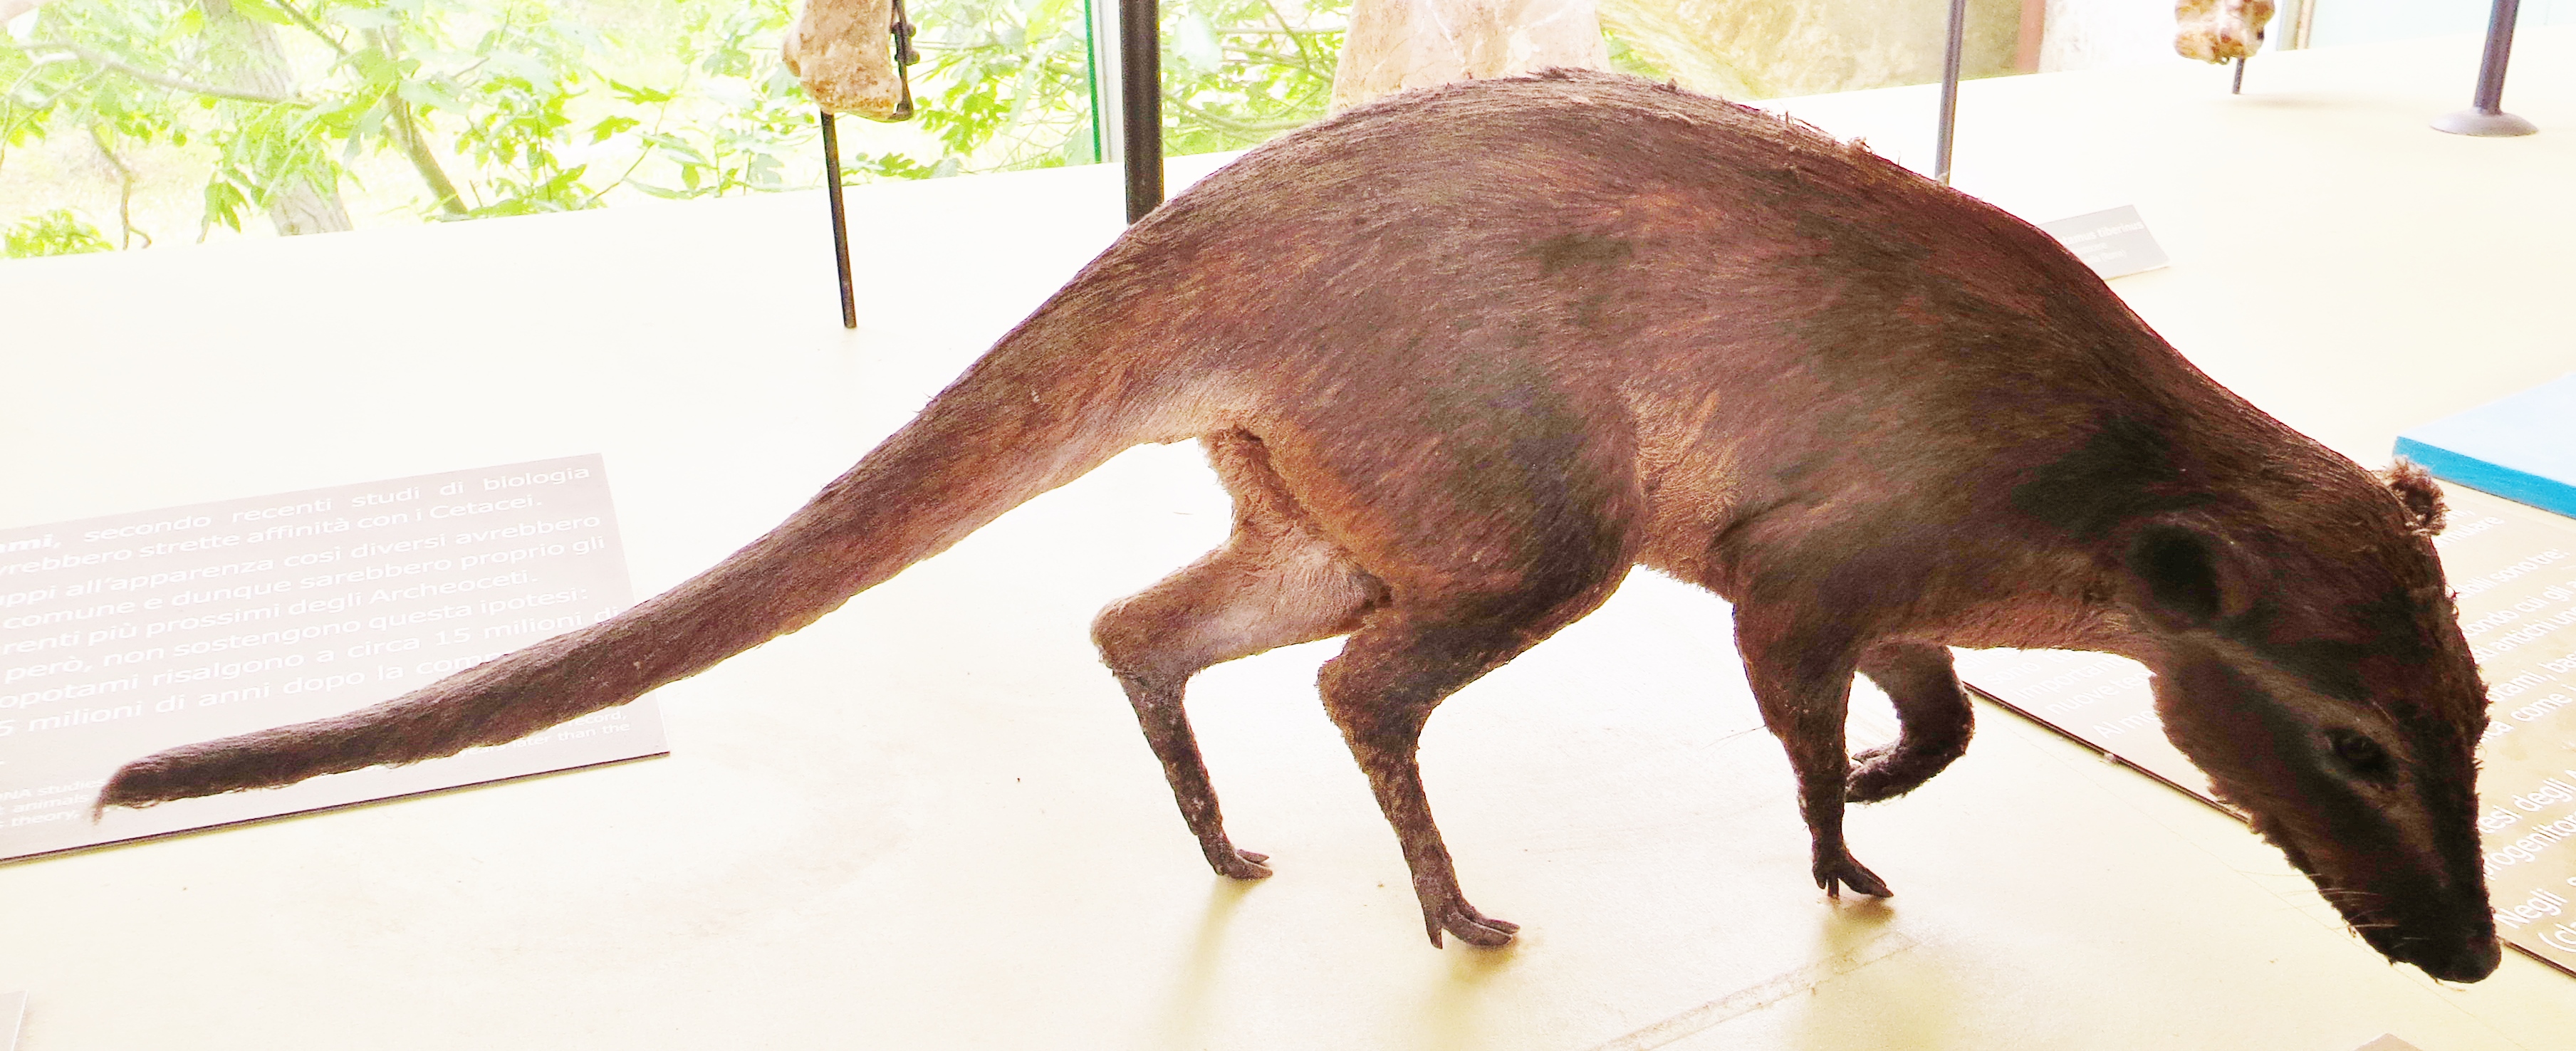 Indohyus, a furry ancestor of modern whales. (Ghedoghedo/Wikimedia Commons/CC BY-SA)